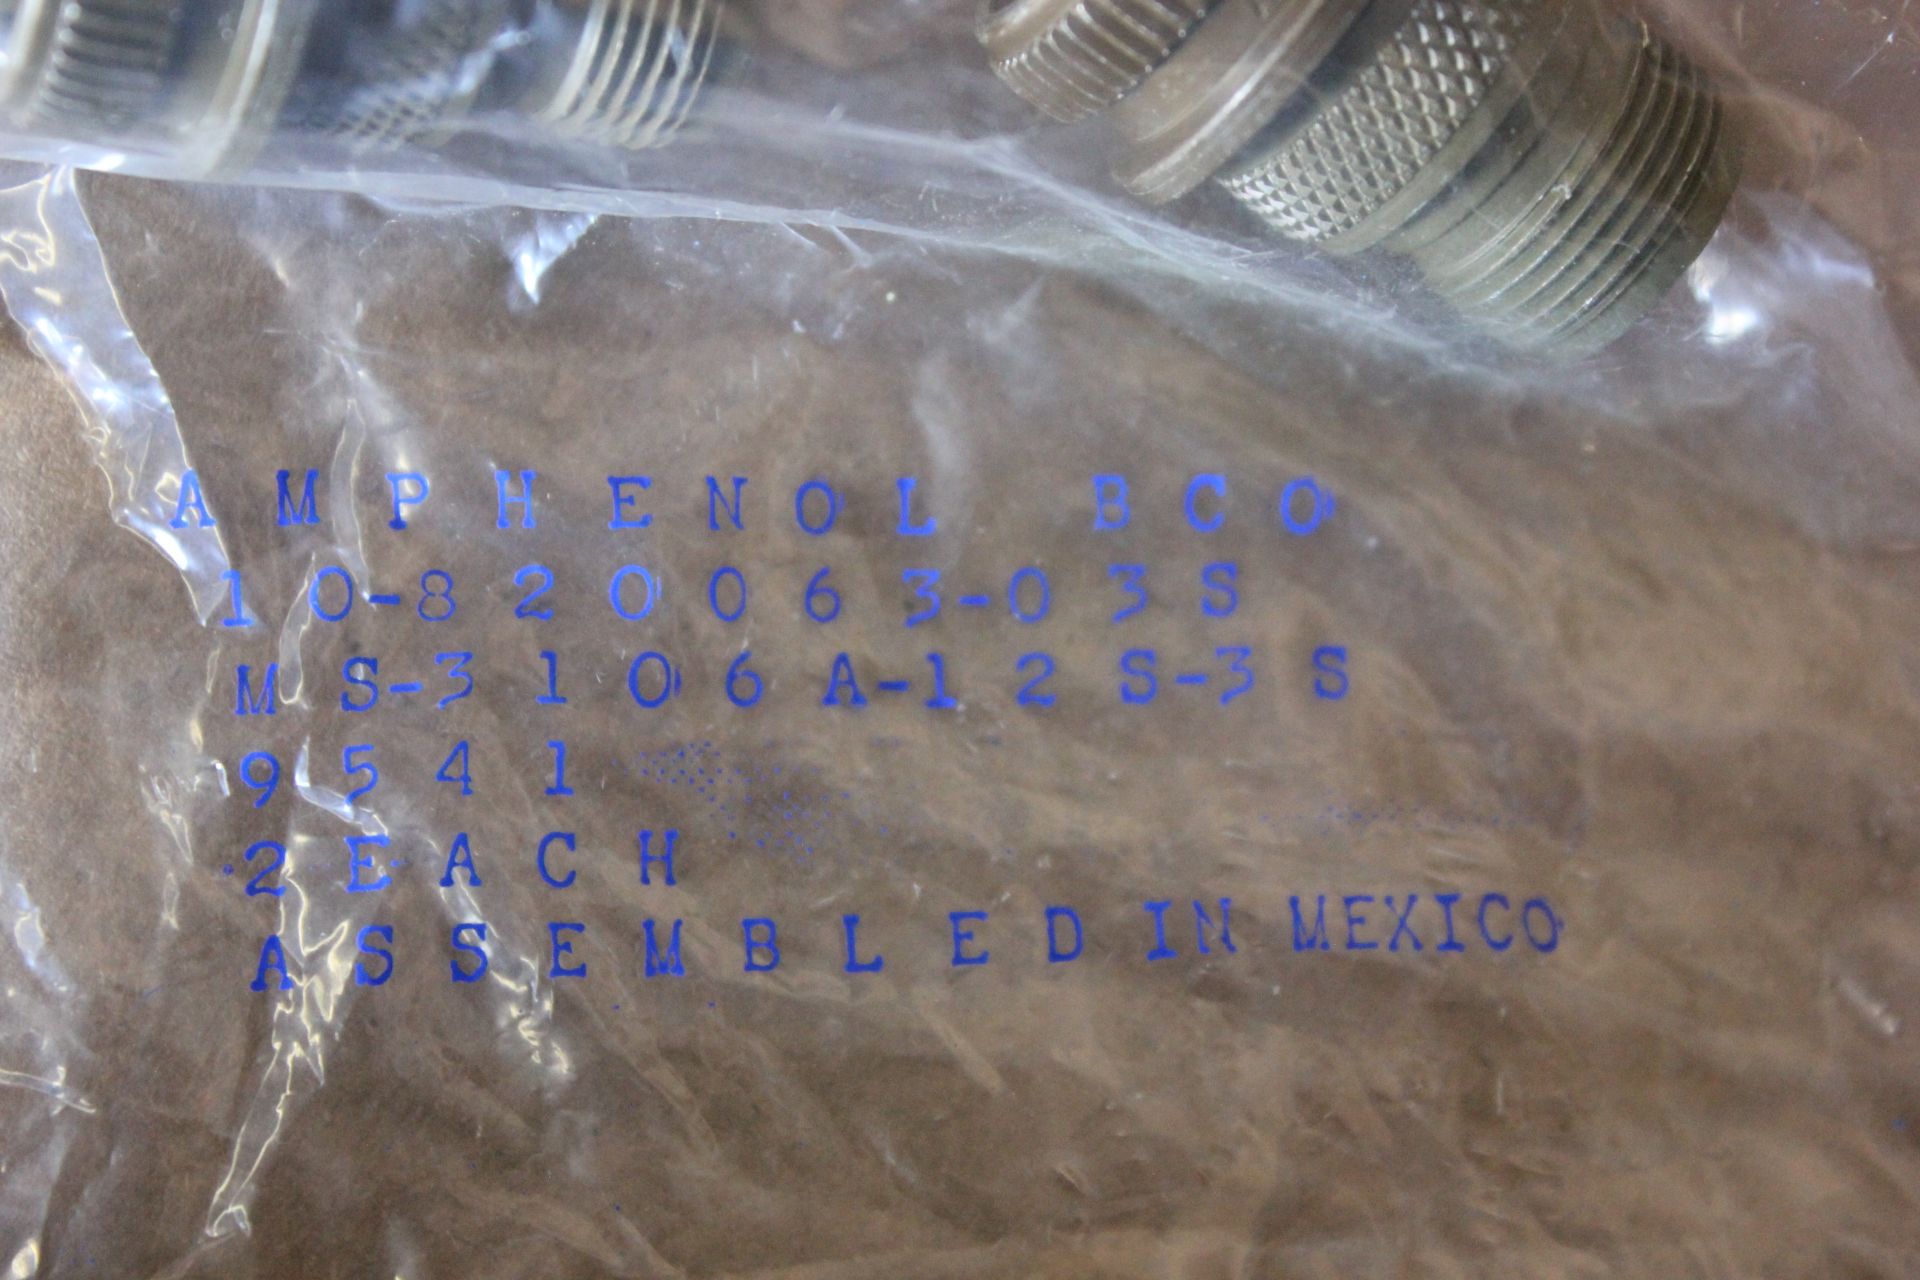 LOT OF NEW AMPHENOL MILITARY SPEC CONNECTORS - Image 7 of 8